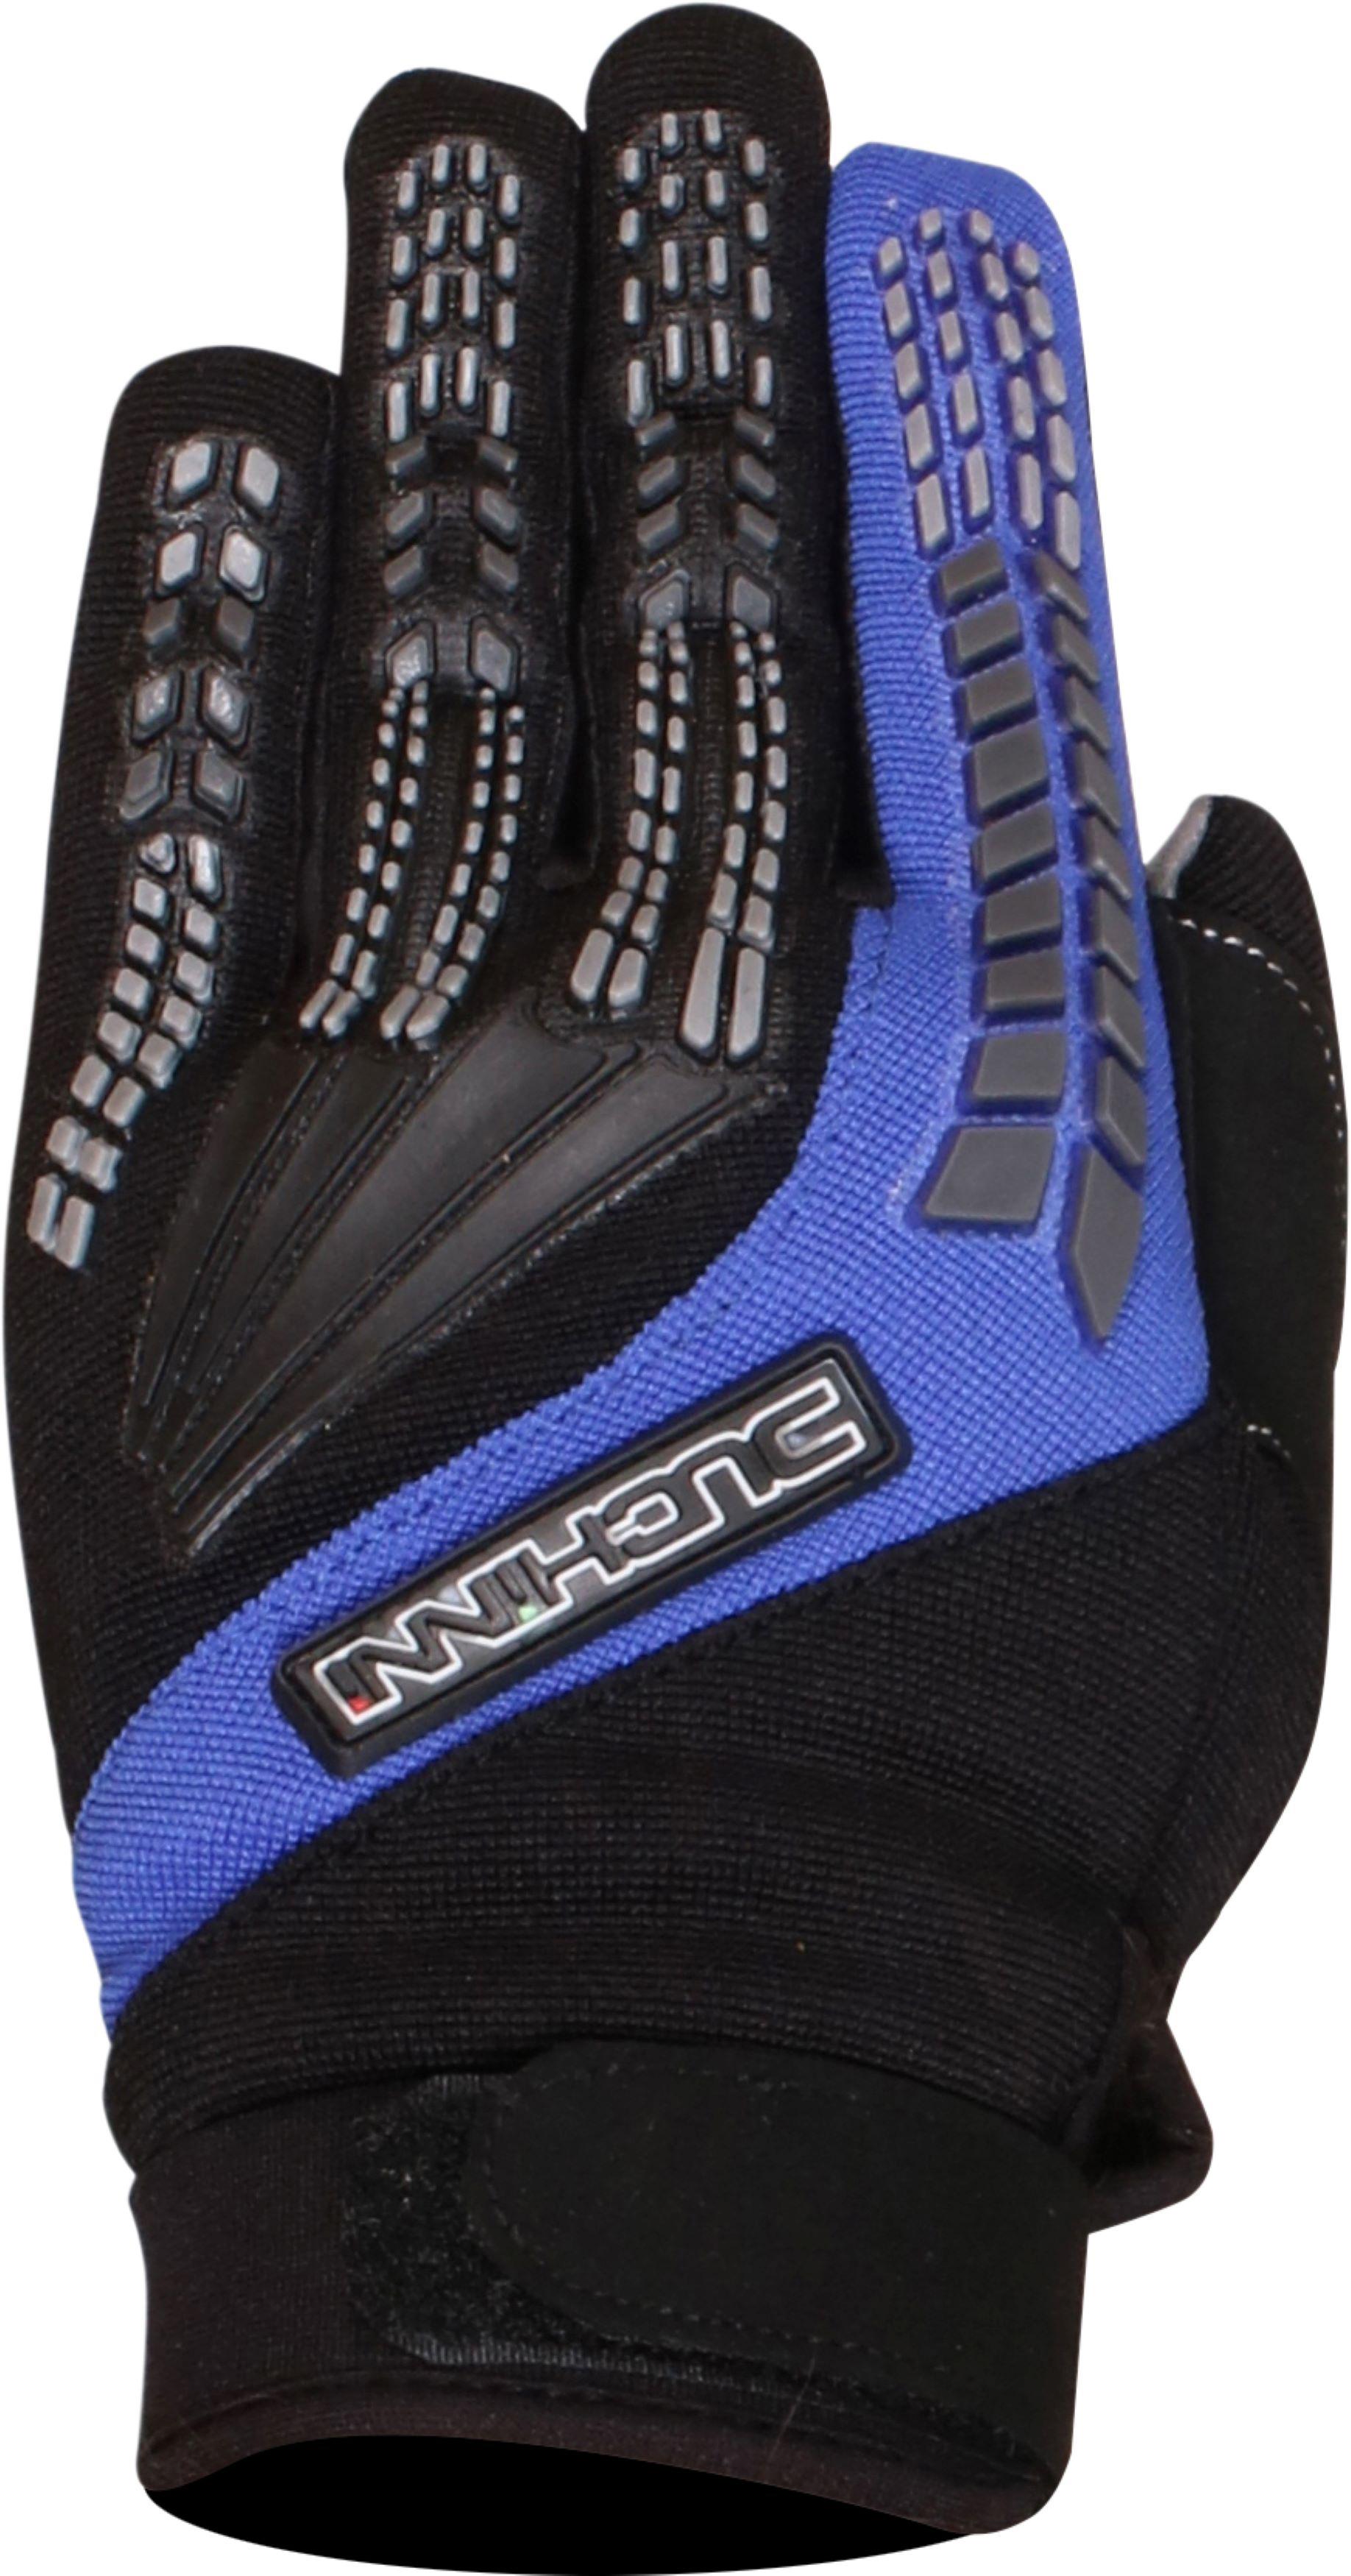 Duchinni Focus Motorcycle Gloves - Black And Blue, 2Xl